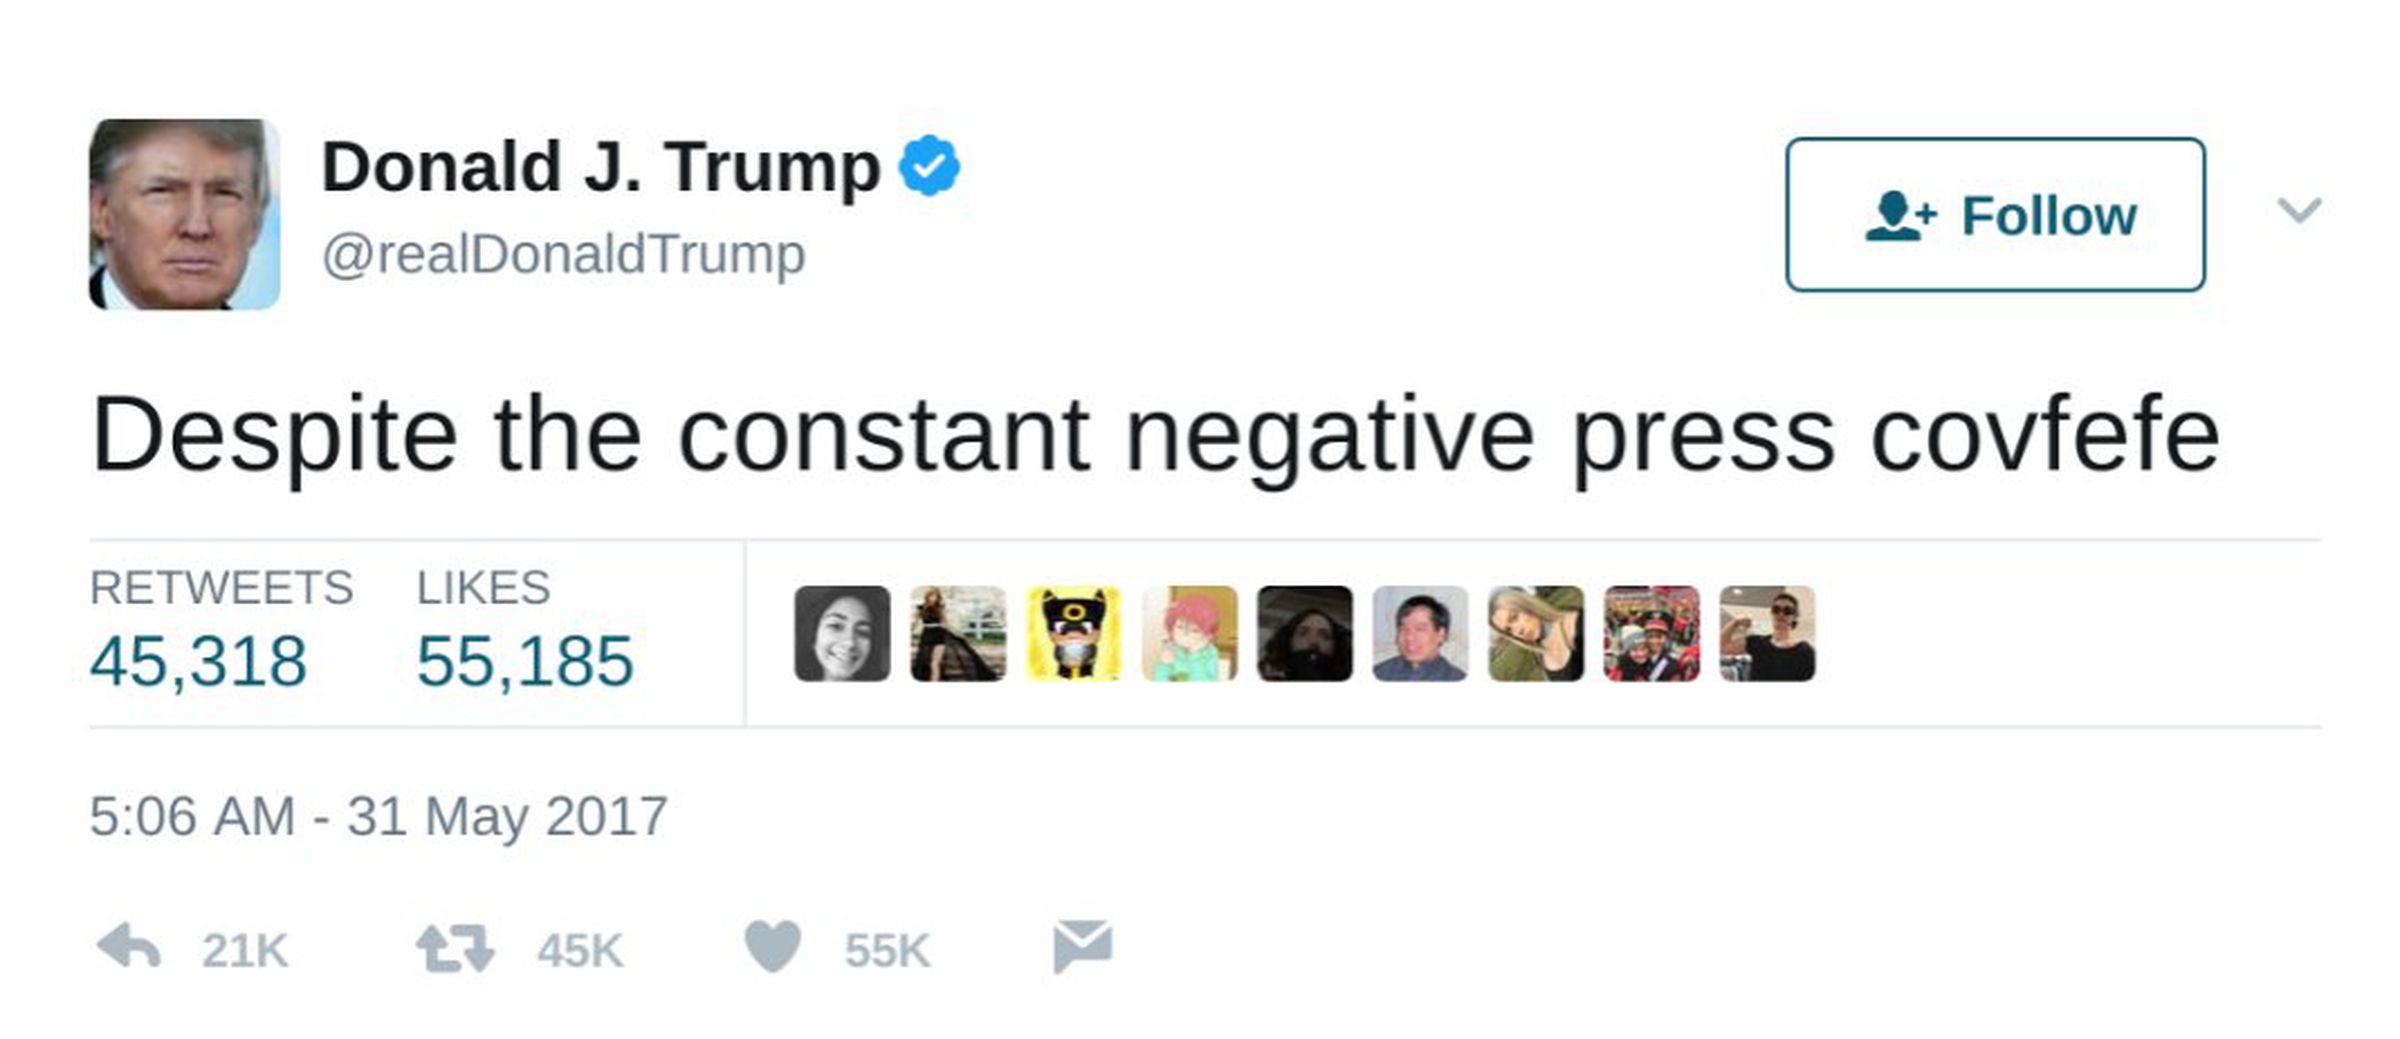 The now-removed “covfefe” tweet. 